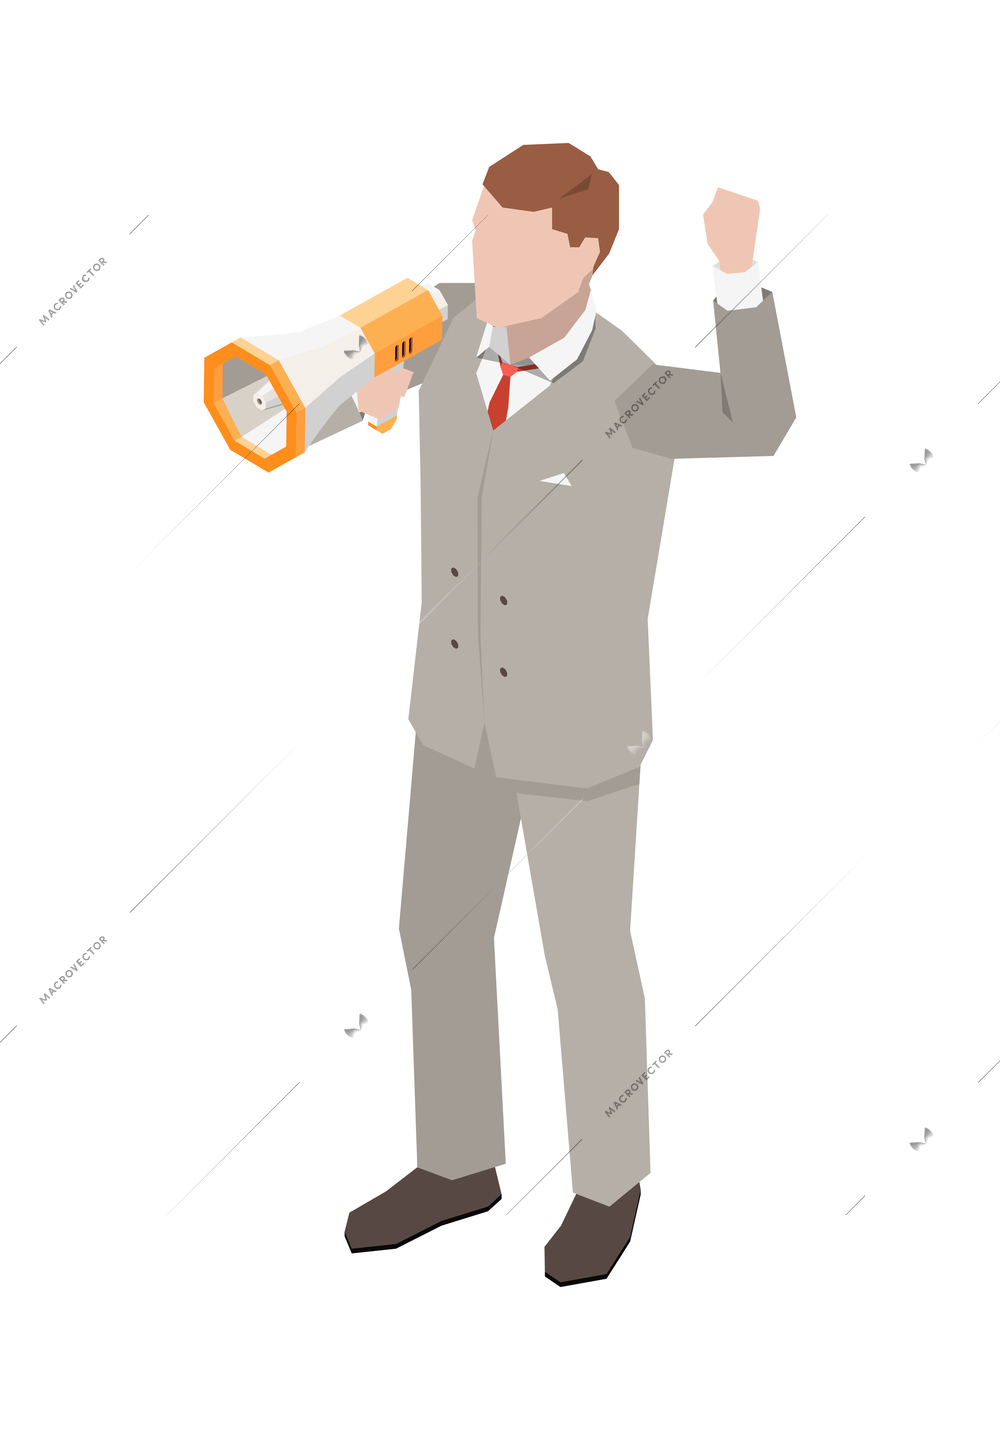 Election voting isometric icon with male character with megaphone 3d vector illustration